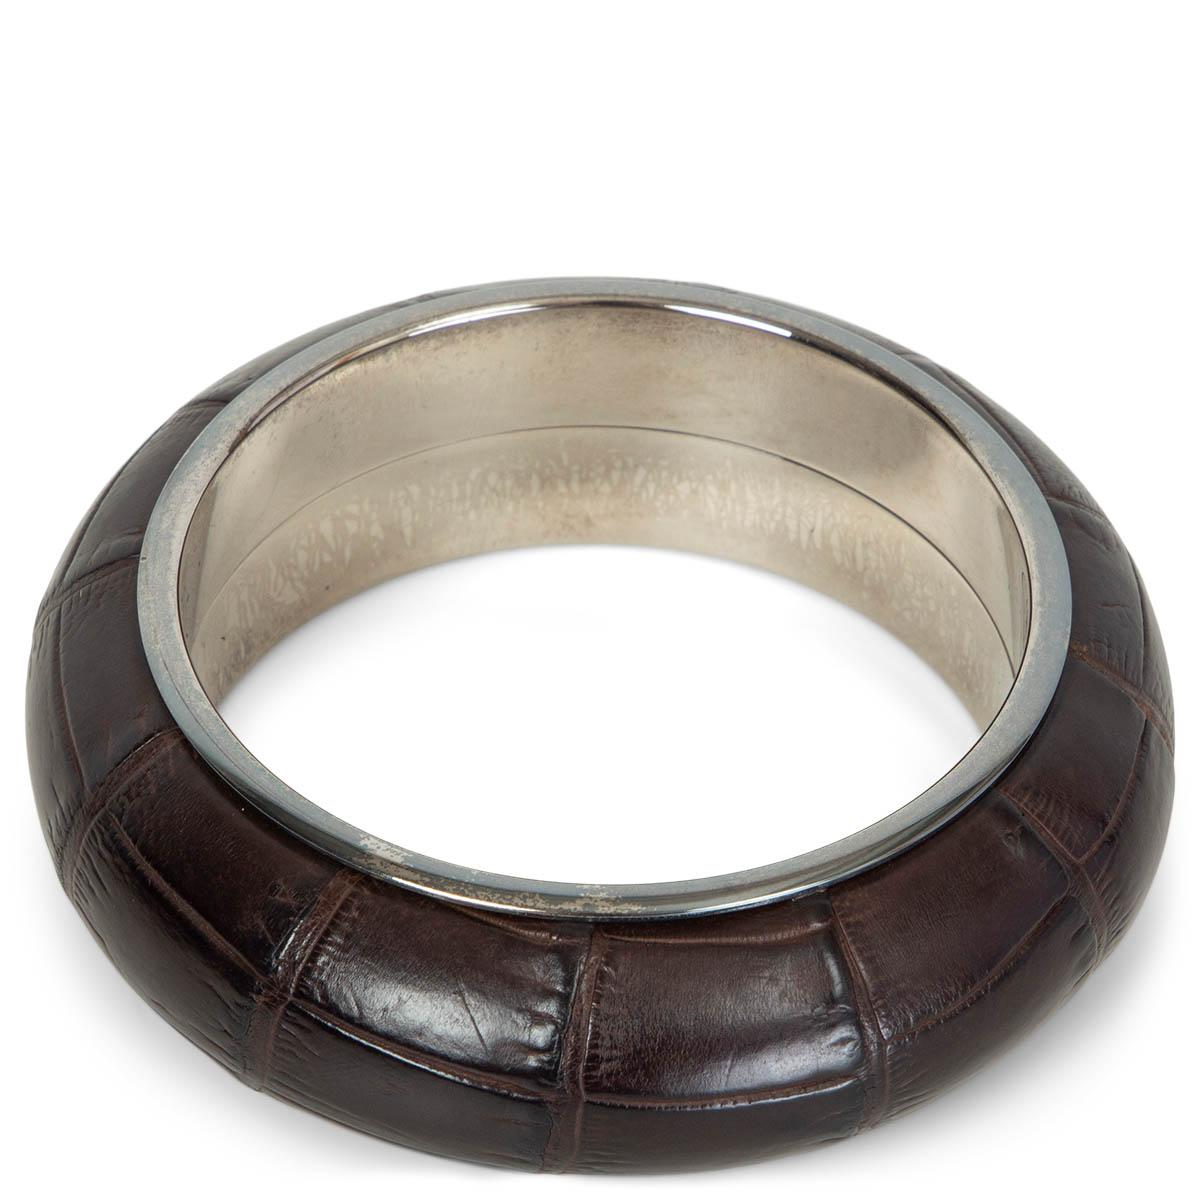 100% authentic Bottega Veneta bracelet in espresso brown crocodile and sterling silver. Has been worn and is in excellent condition.

Measurements
Width	2.5cm (1in)
Circumference	19cm (7.4in)

All our listings include only the listed item unless